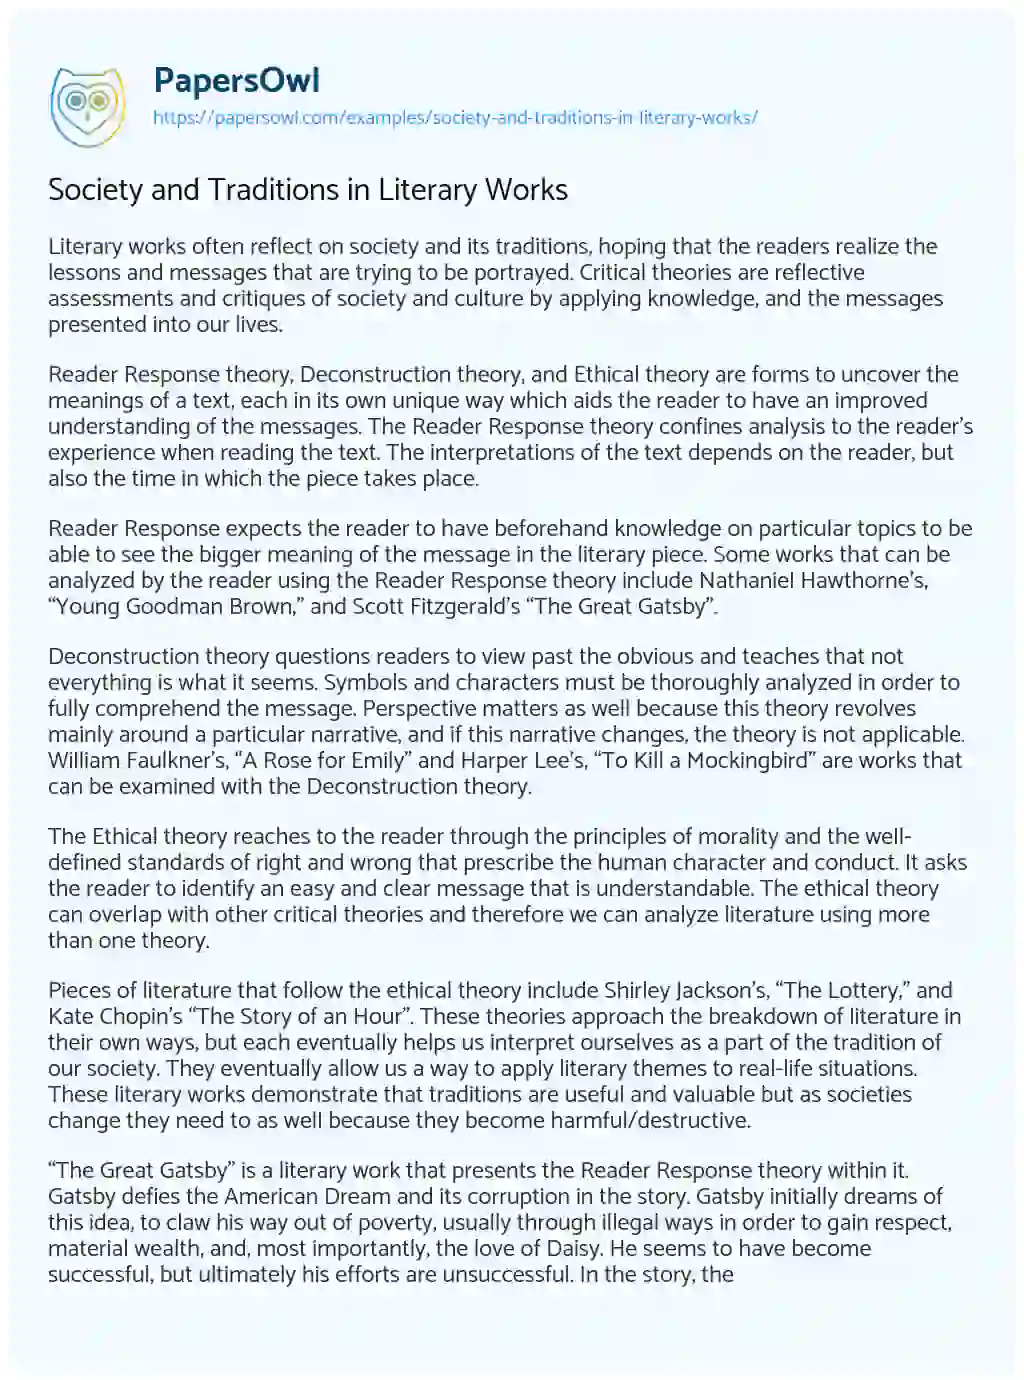 Essay on Society and Traditions in Literary Works